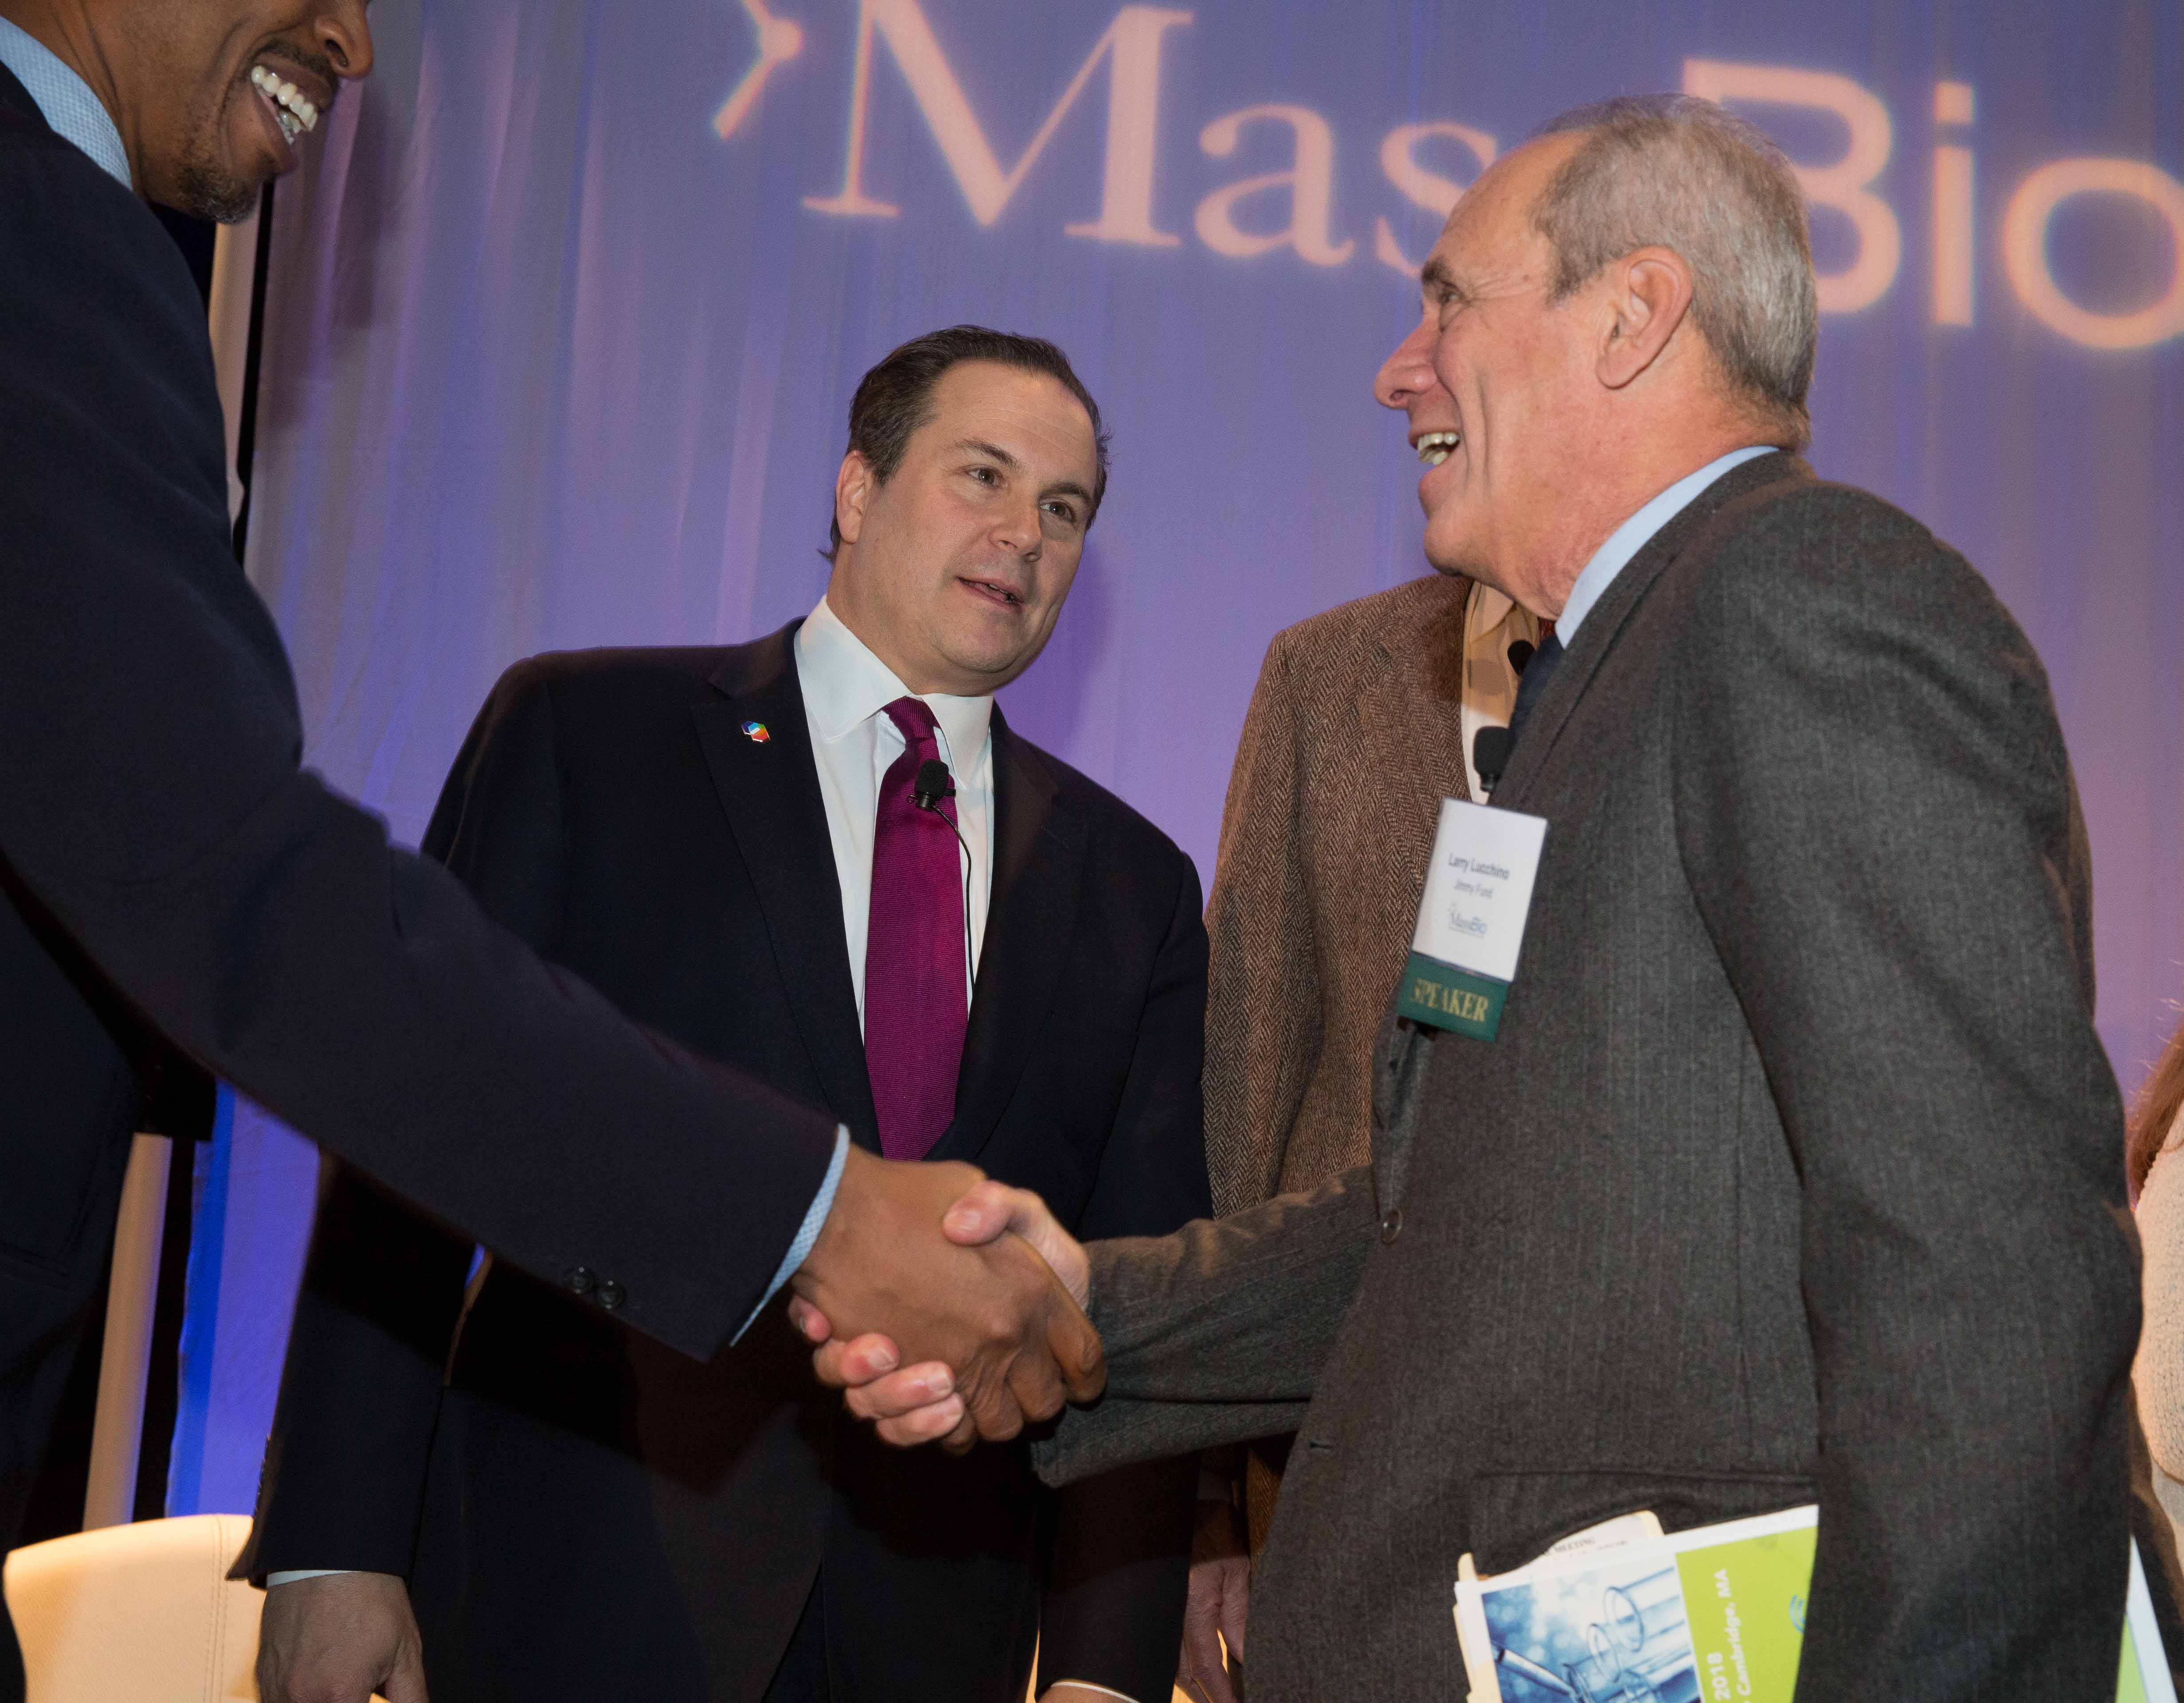 Massachusetts Biotechnology Council holds annual meeting, celebrates